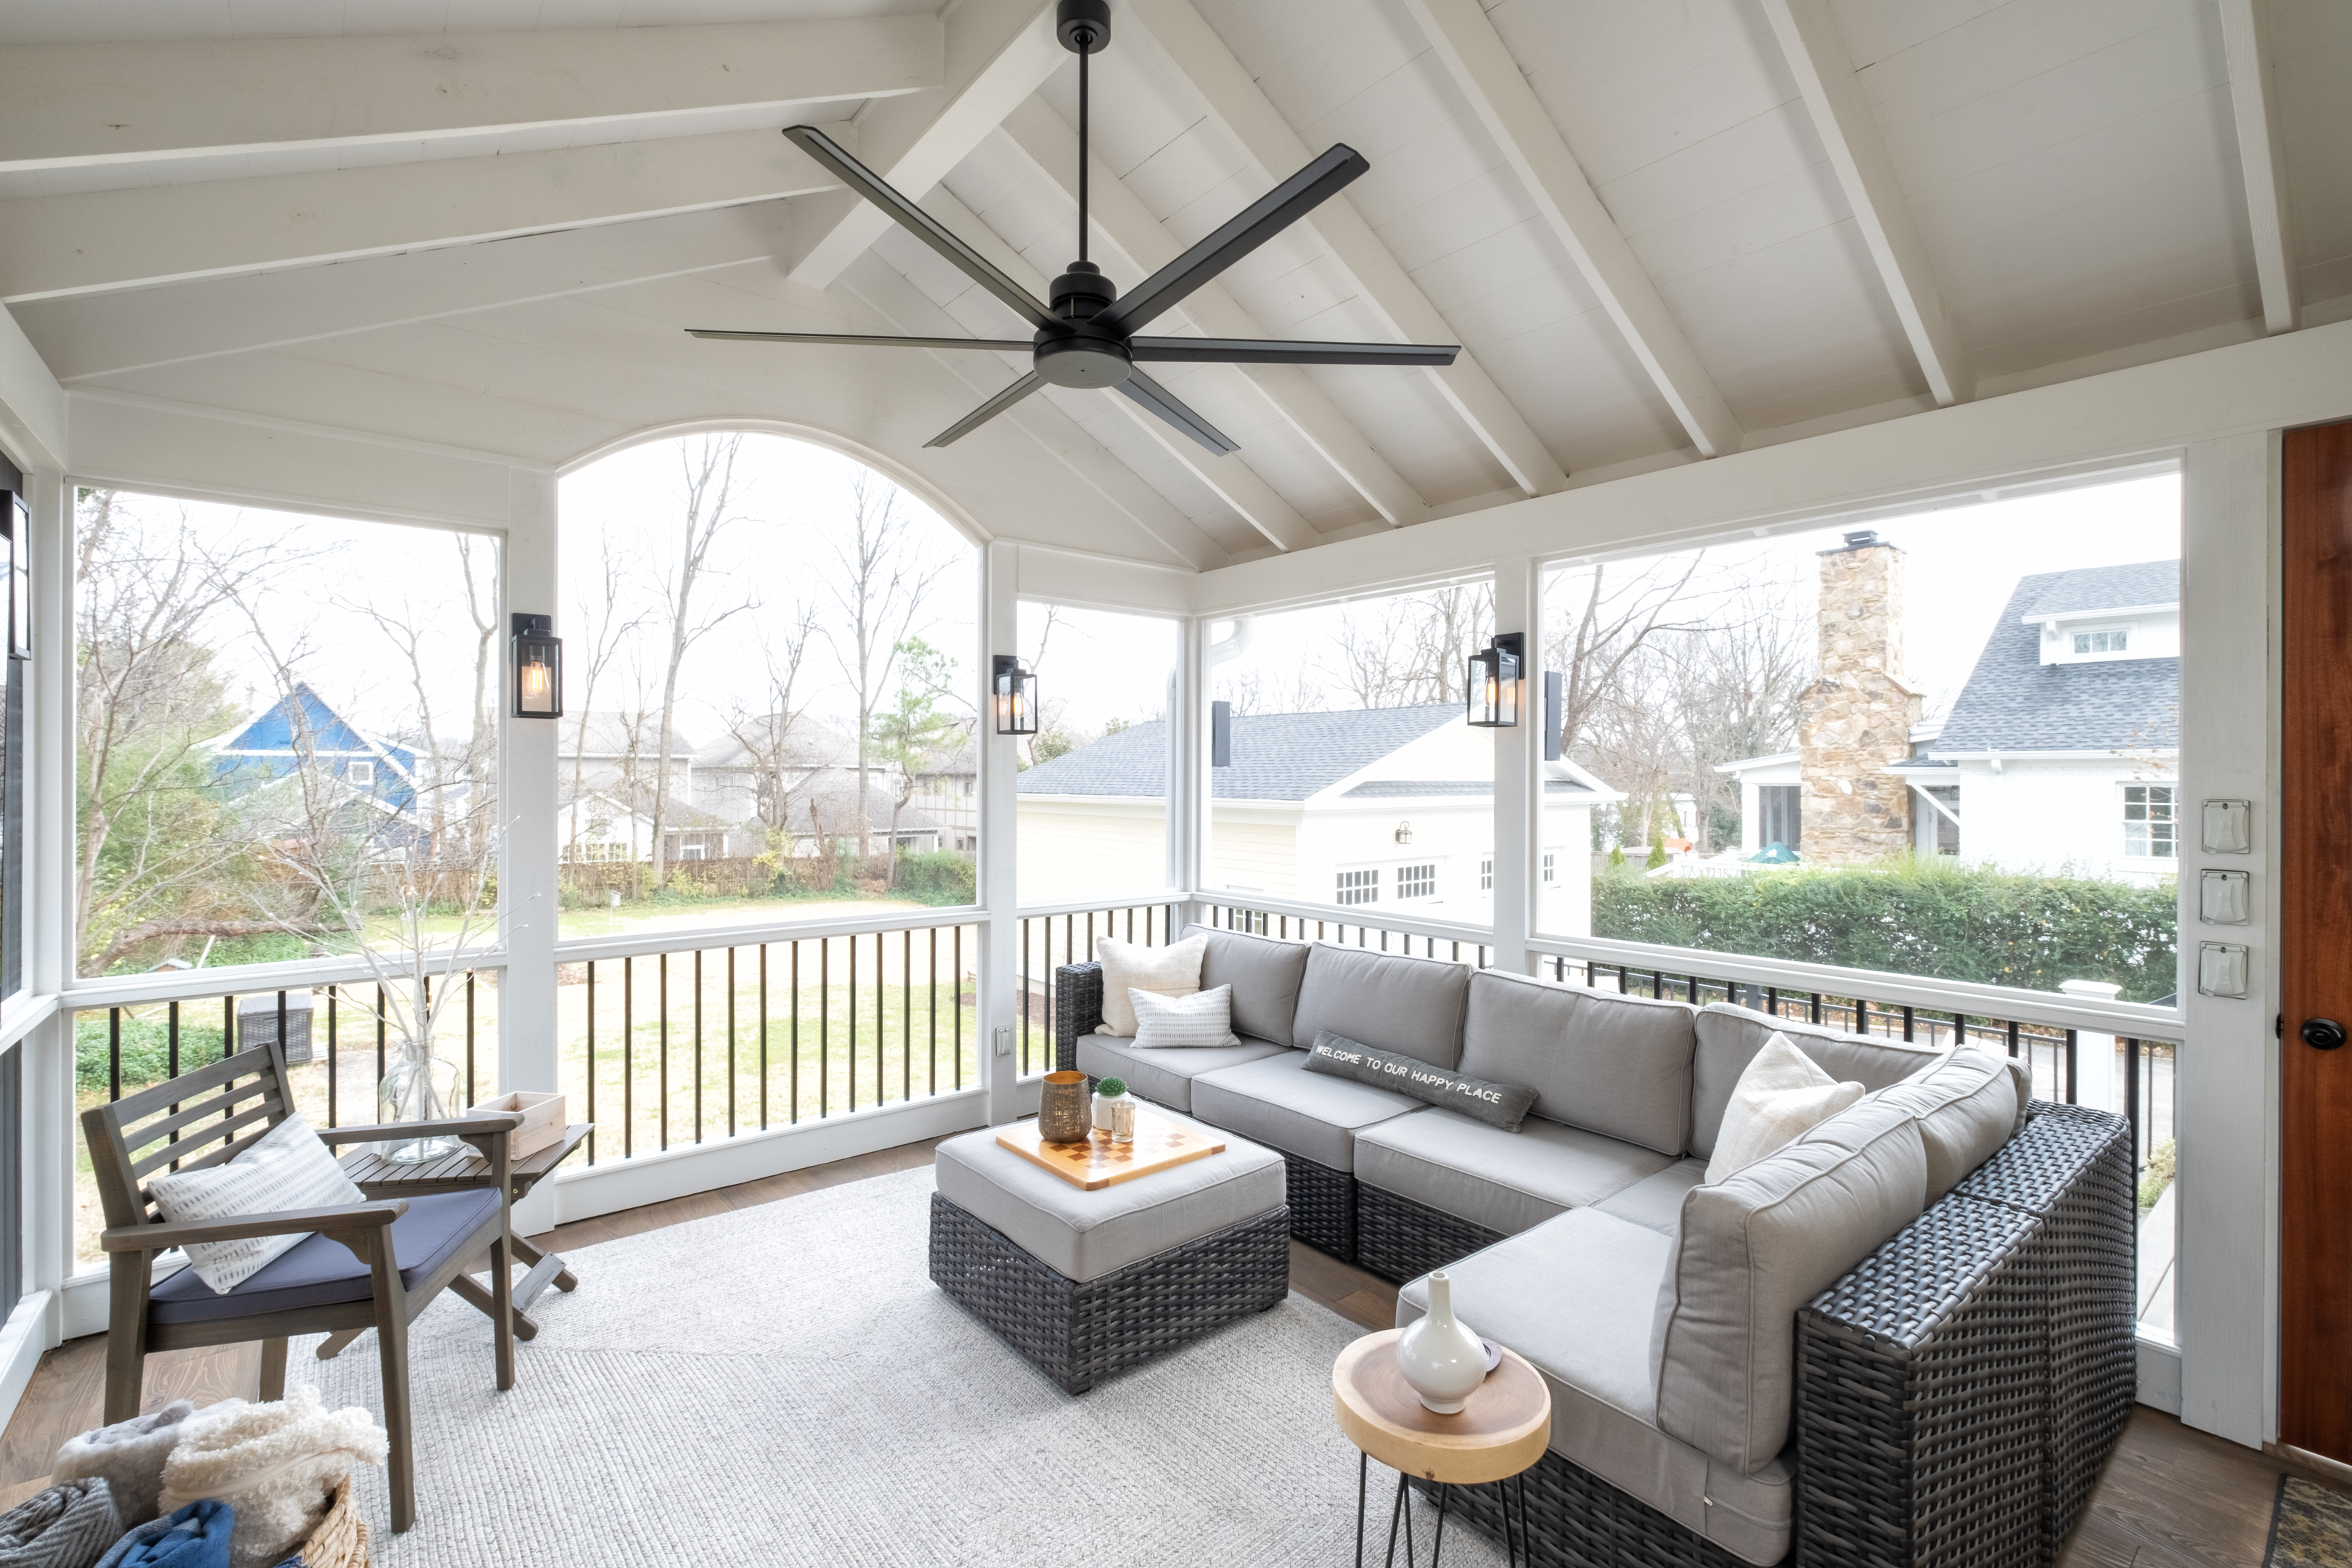 porch-screened-interior-seating-aluminum-spindle-railing-fan-exposed-ceiling